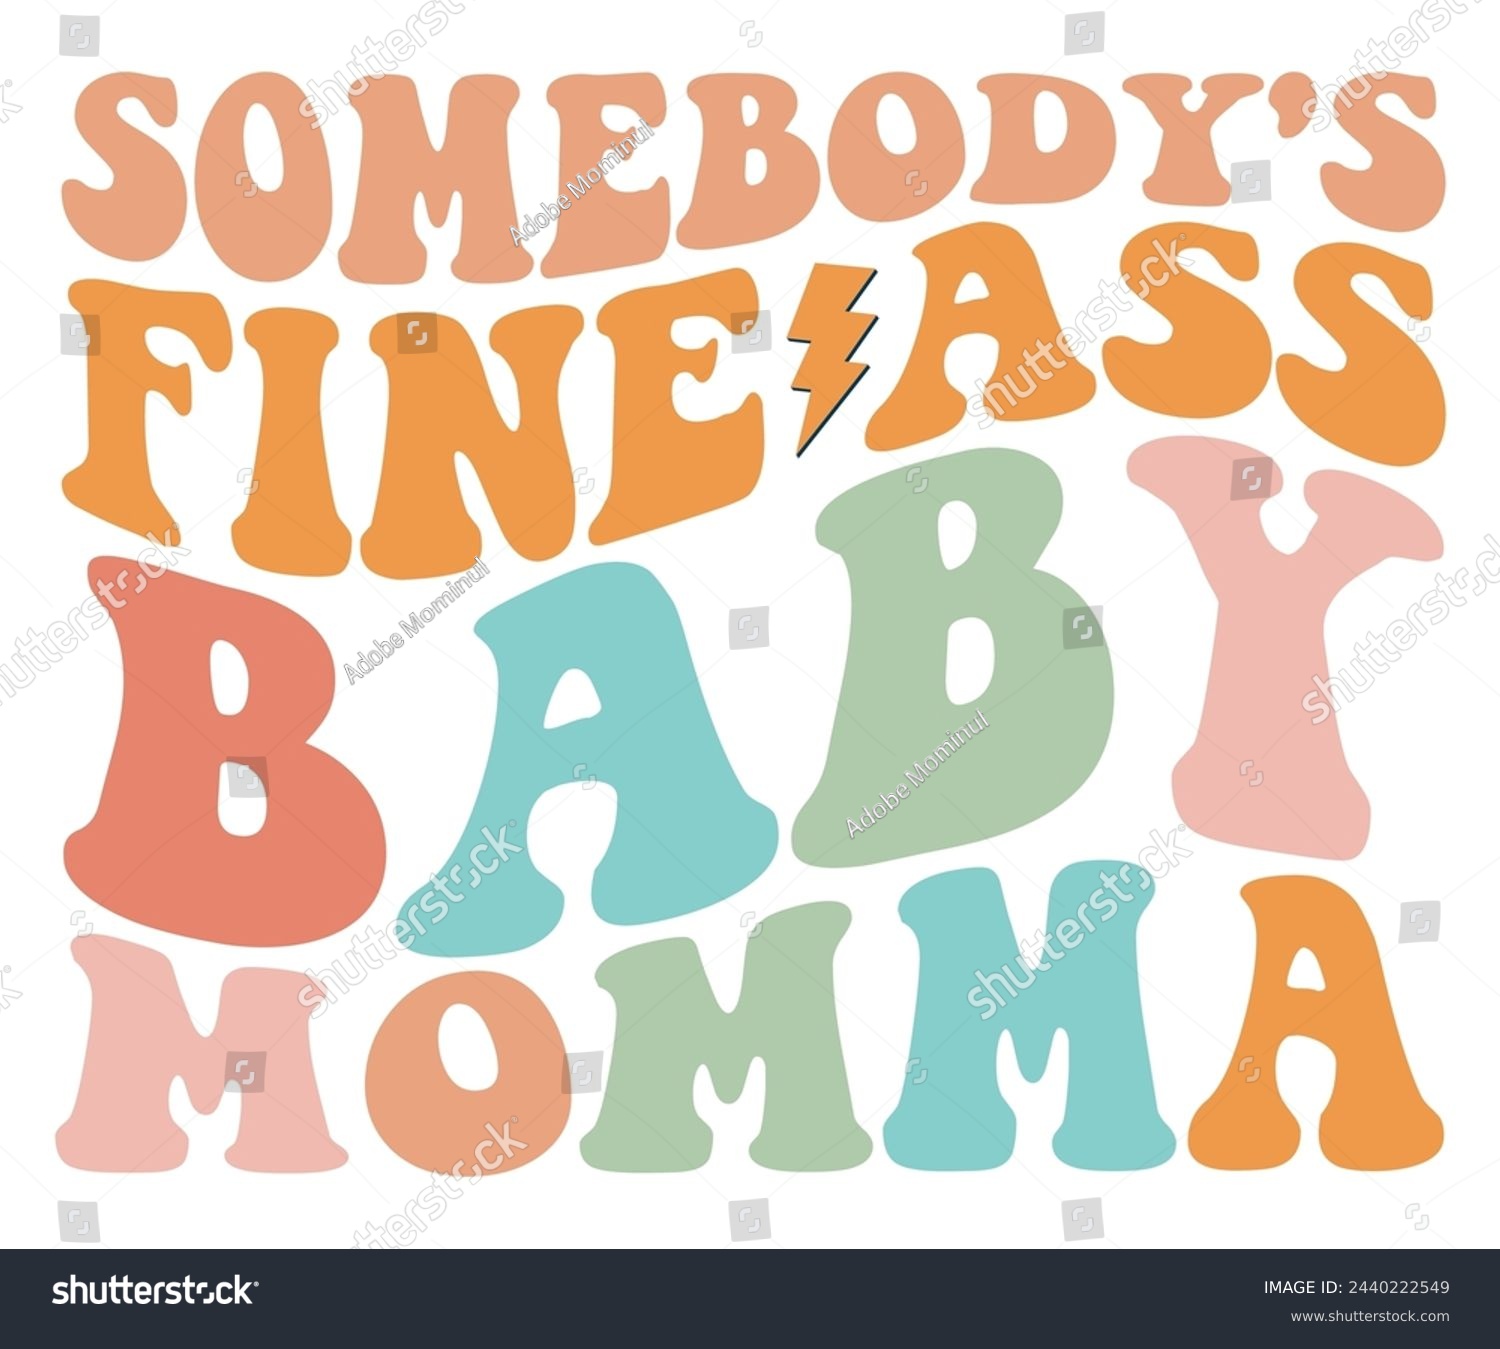 SVG of Somebody's Fine Ass Baby Momma Svg,Mother's Day Svg,Retro Groovy,Svg,T-shirt,Typography,Svg Cut File,Commercial Use,Instant Download  svg